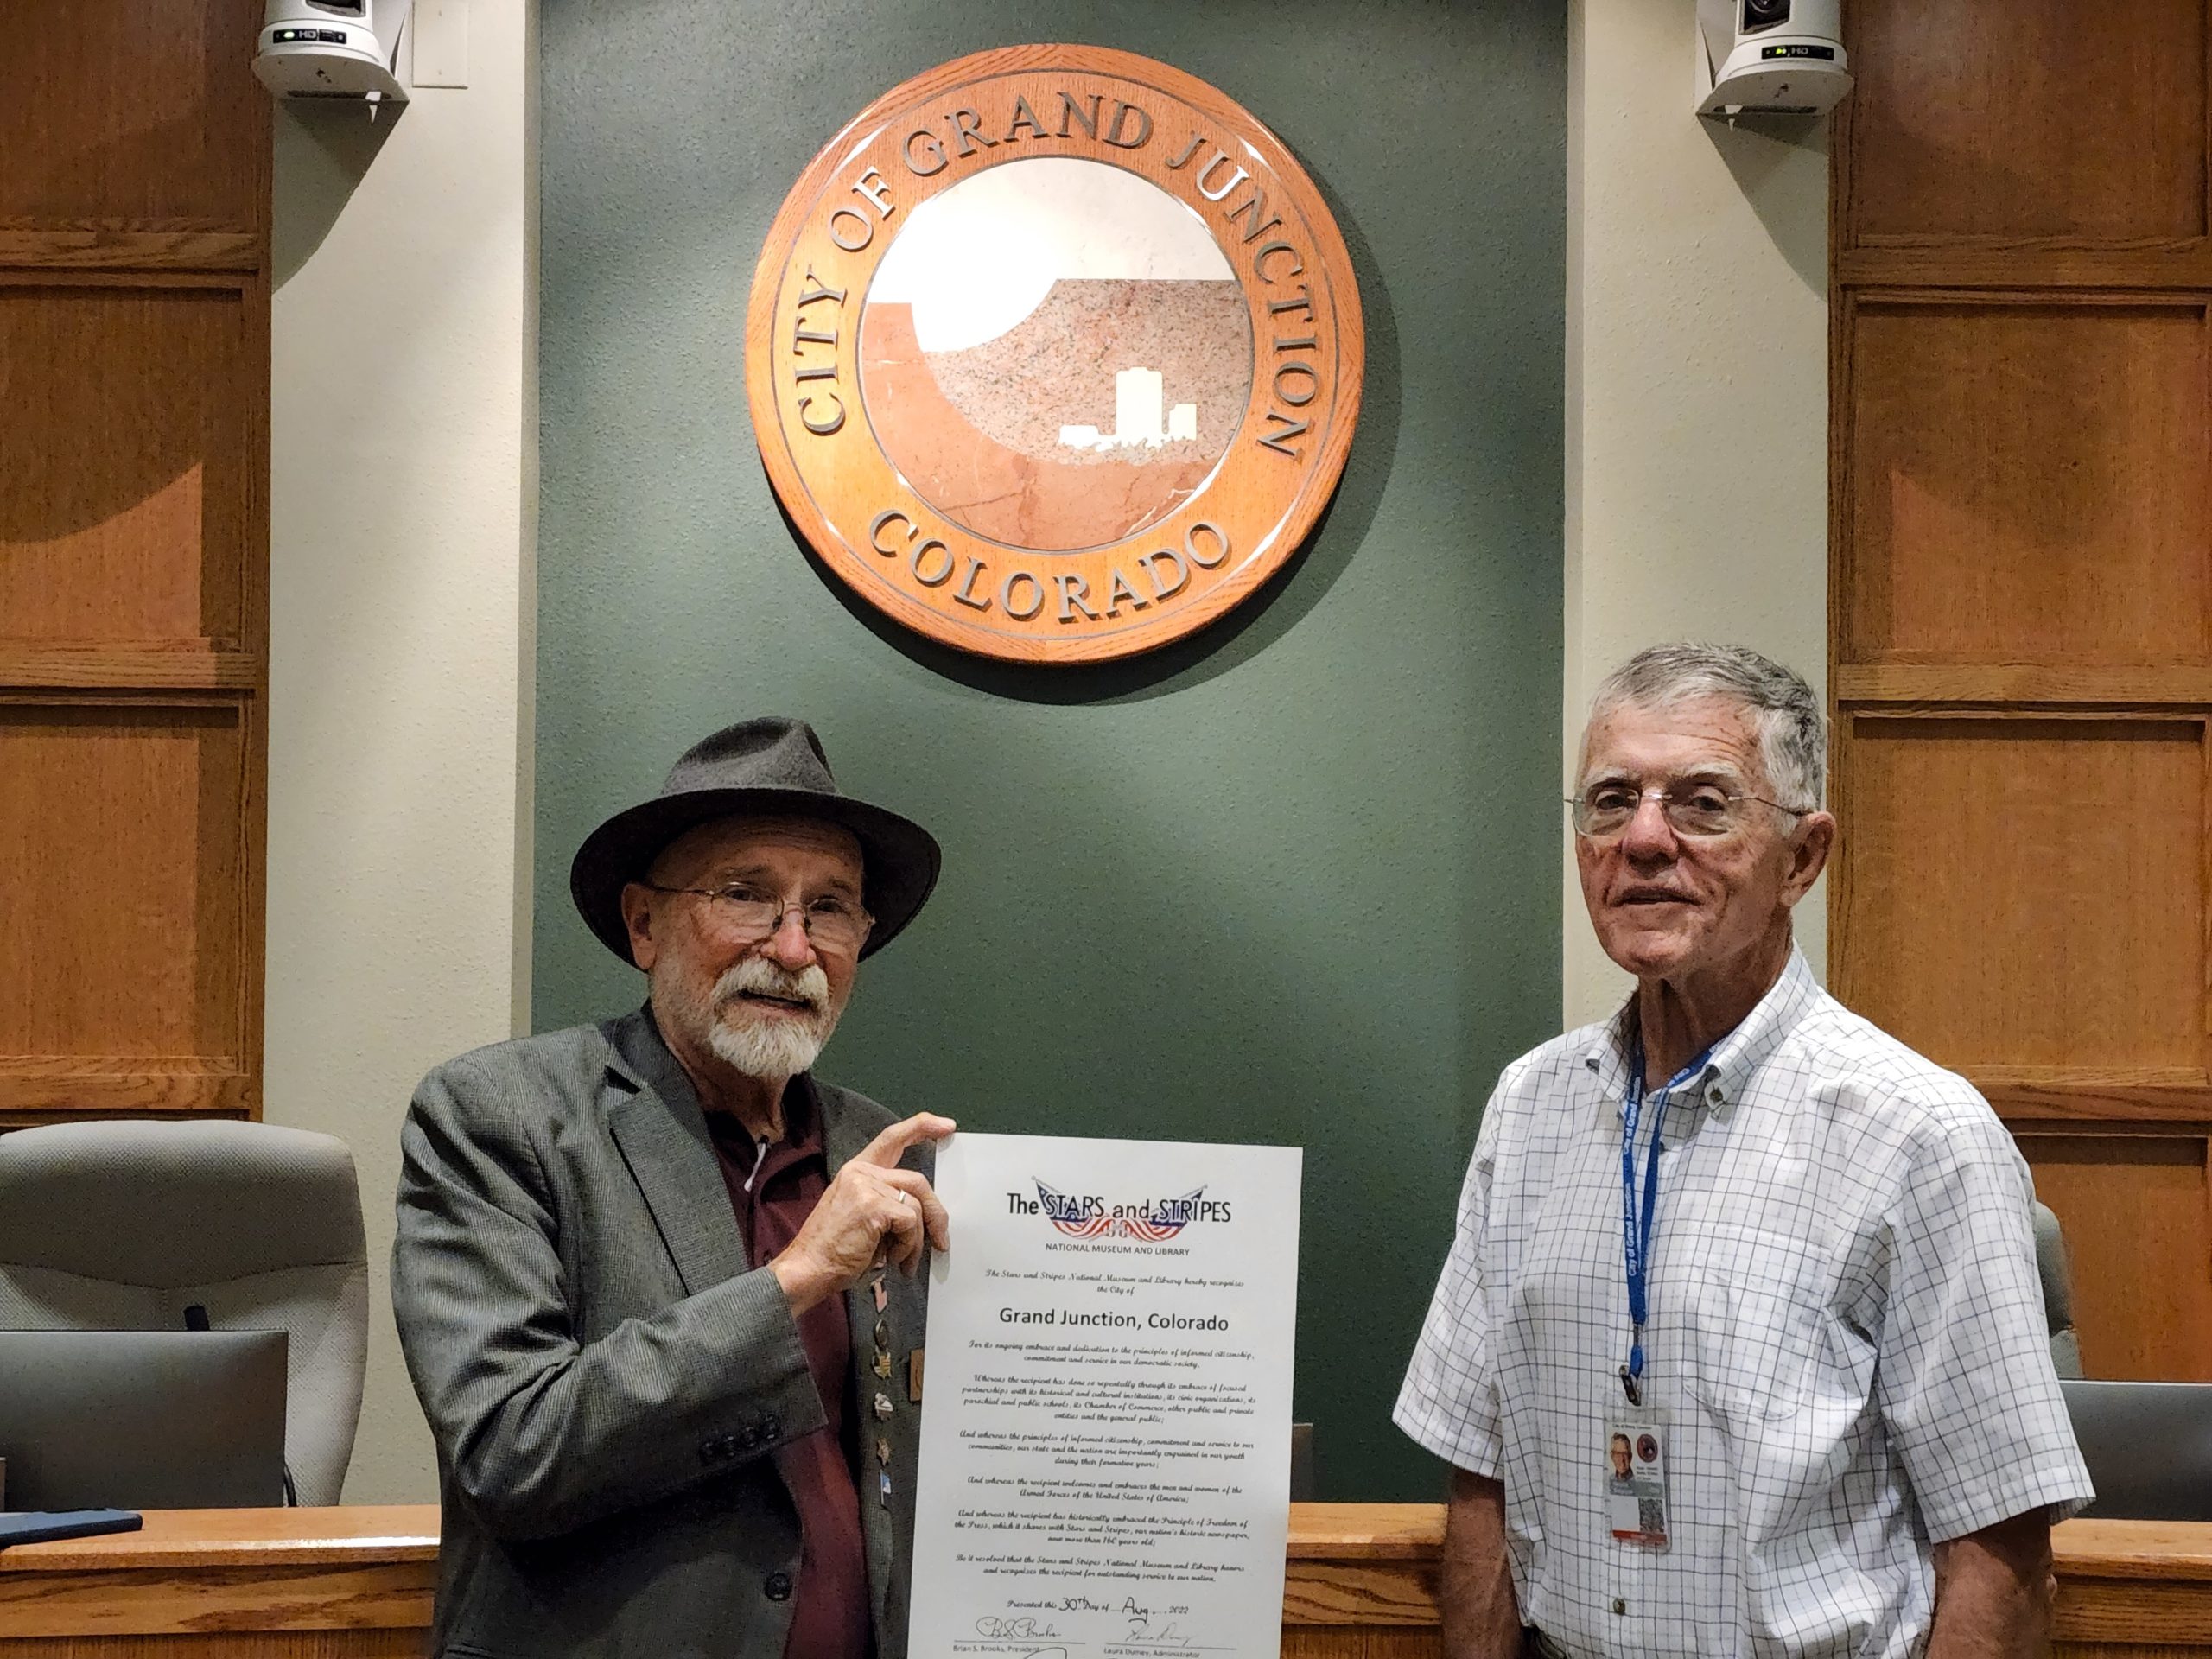 On Tuesday, August 30, 2022, Jim Martin presented the Stars and Stripes City Proclamation to Grand Junction, Colorado.